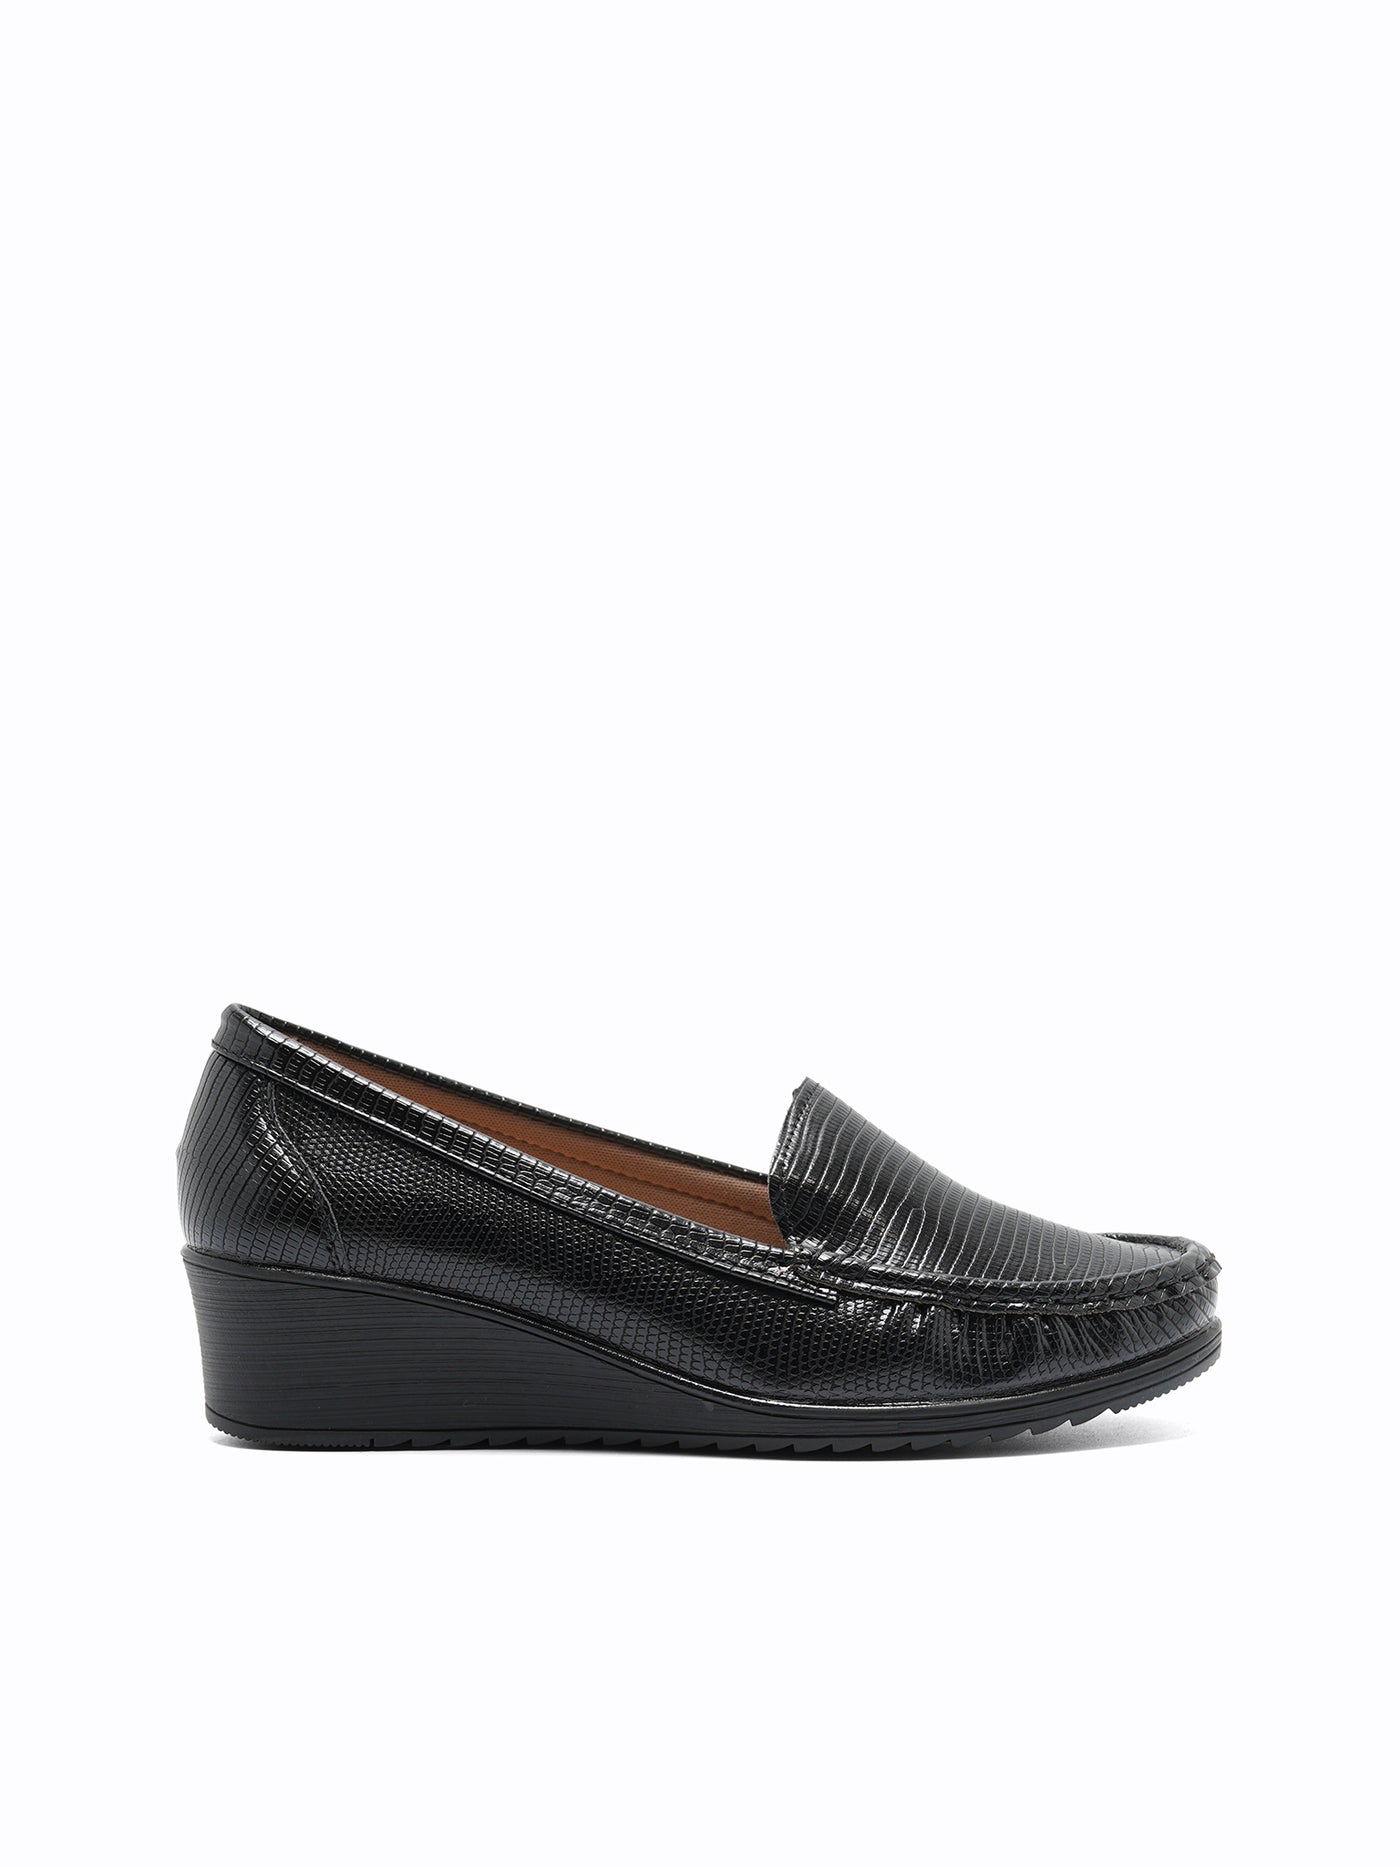 Rosanna Wedge Loafers